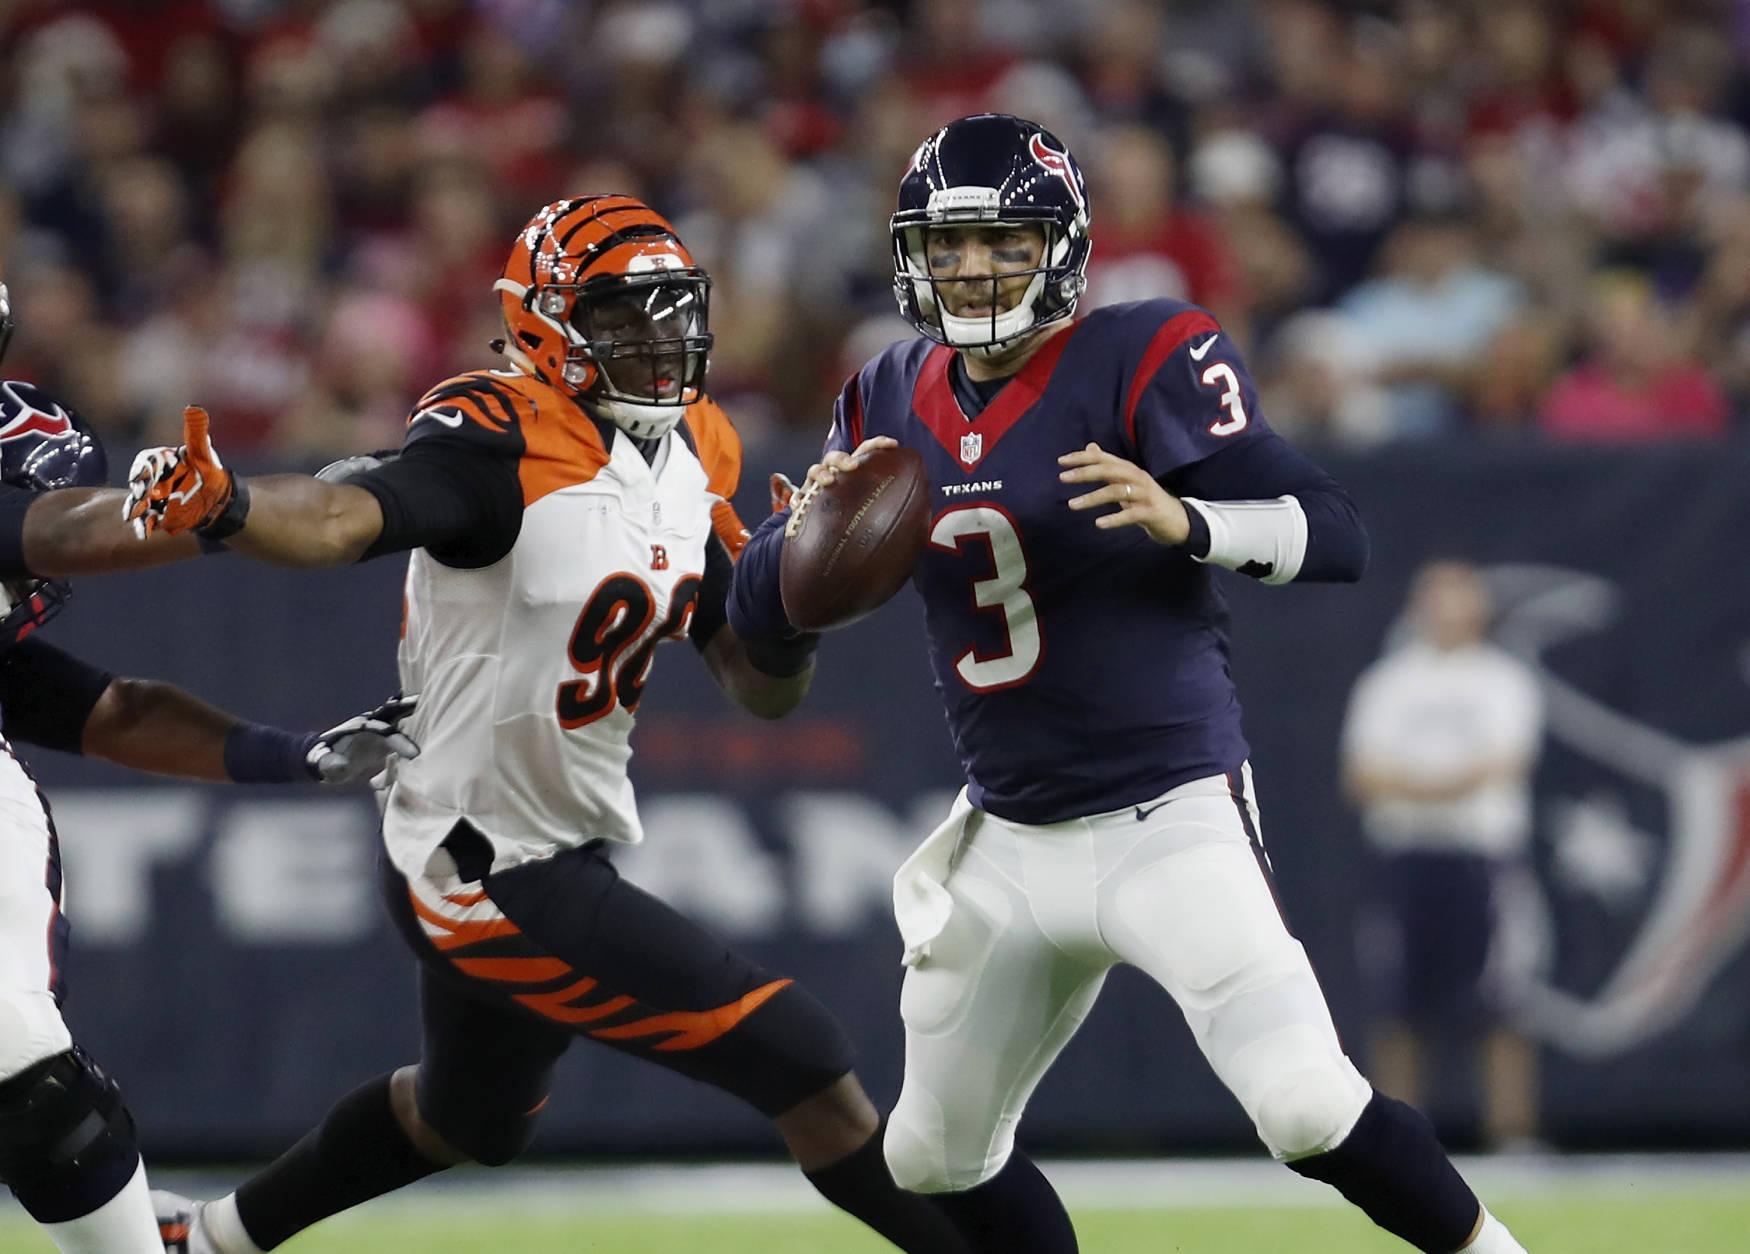 HOUSTON, TX - DECEMBER 24:  Carlos Dunlap #96 of the Cincinnati Bengals pressures Tom Savage #3 of the Houston Texans in the third quarter at NRG Stadium on December 24, 2016 in Houston, Texas.  (Photo by Tim Warner/Getty Images)